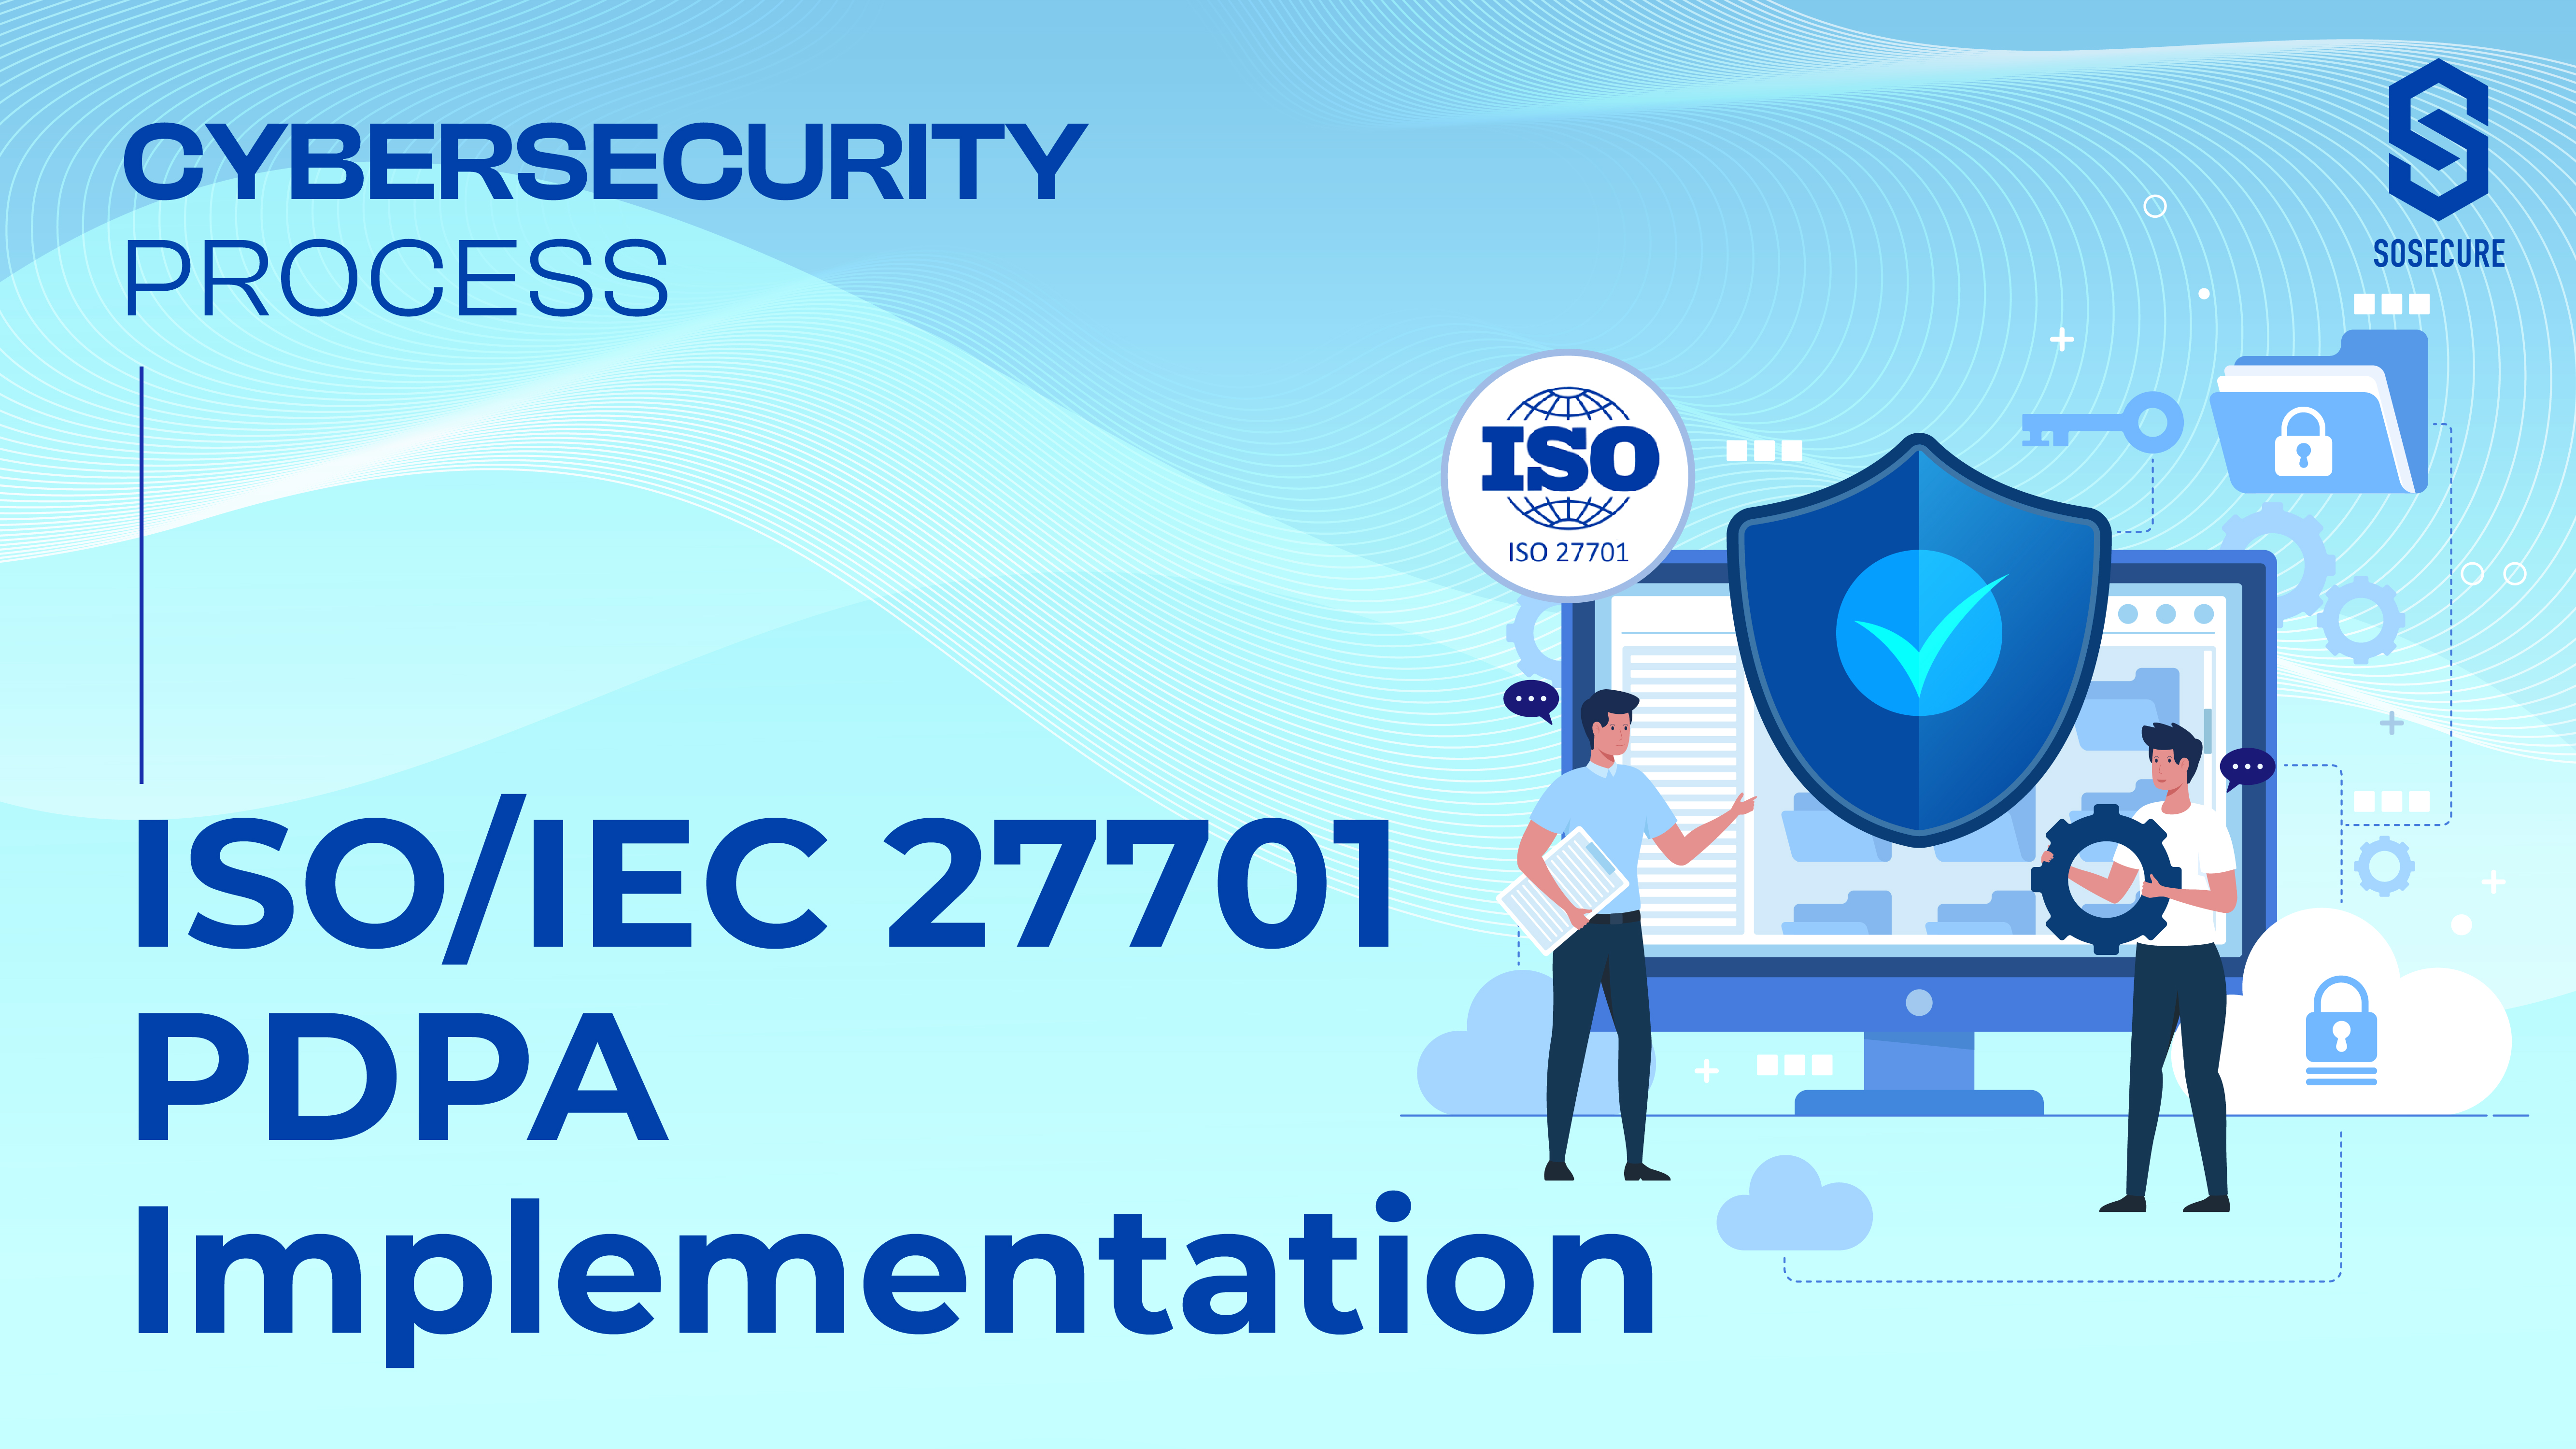 ISO/IEC27701 PDPA IMPLEMENTATION | SOSECURE MORE THAN SECURE